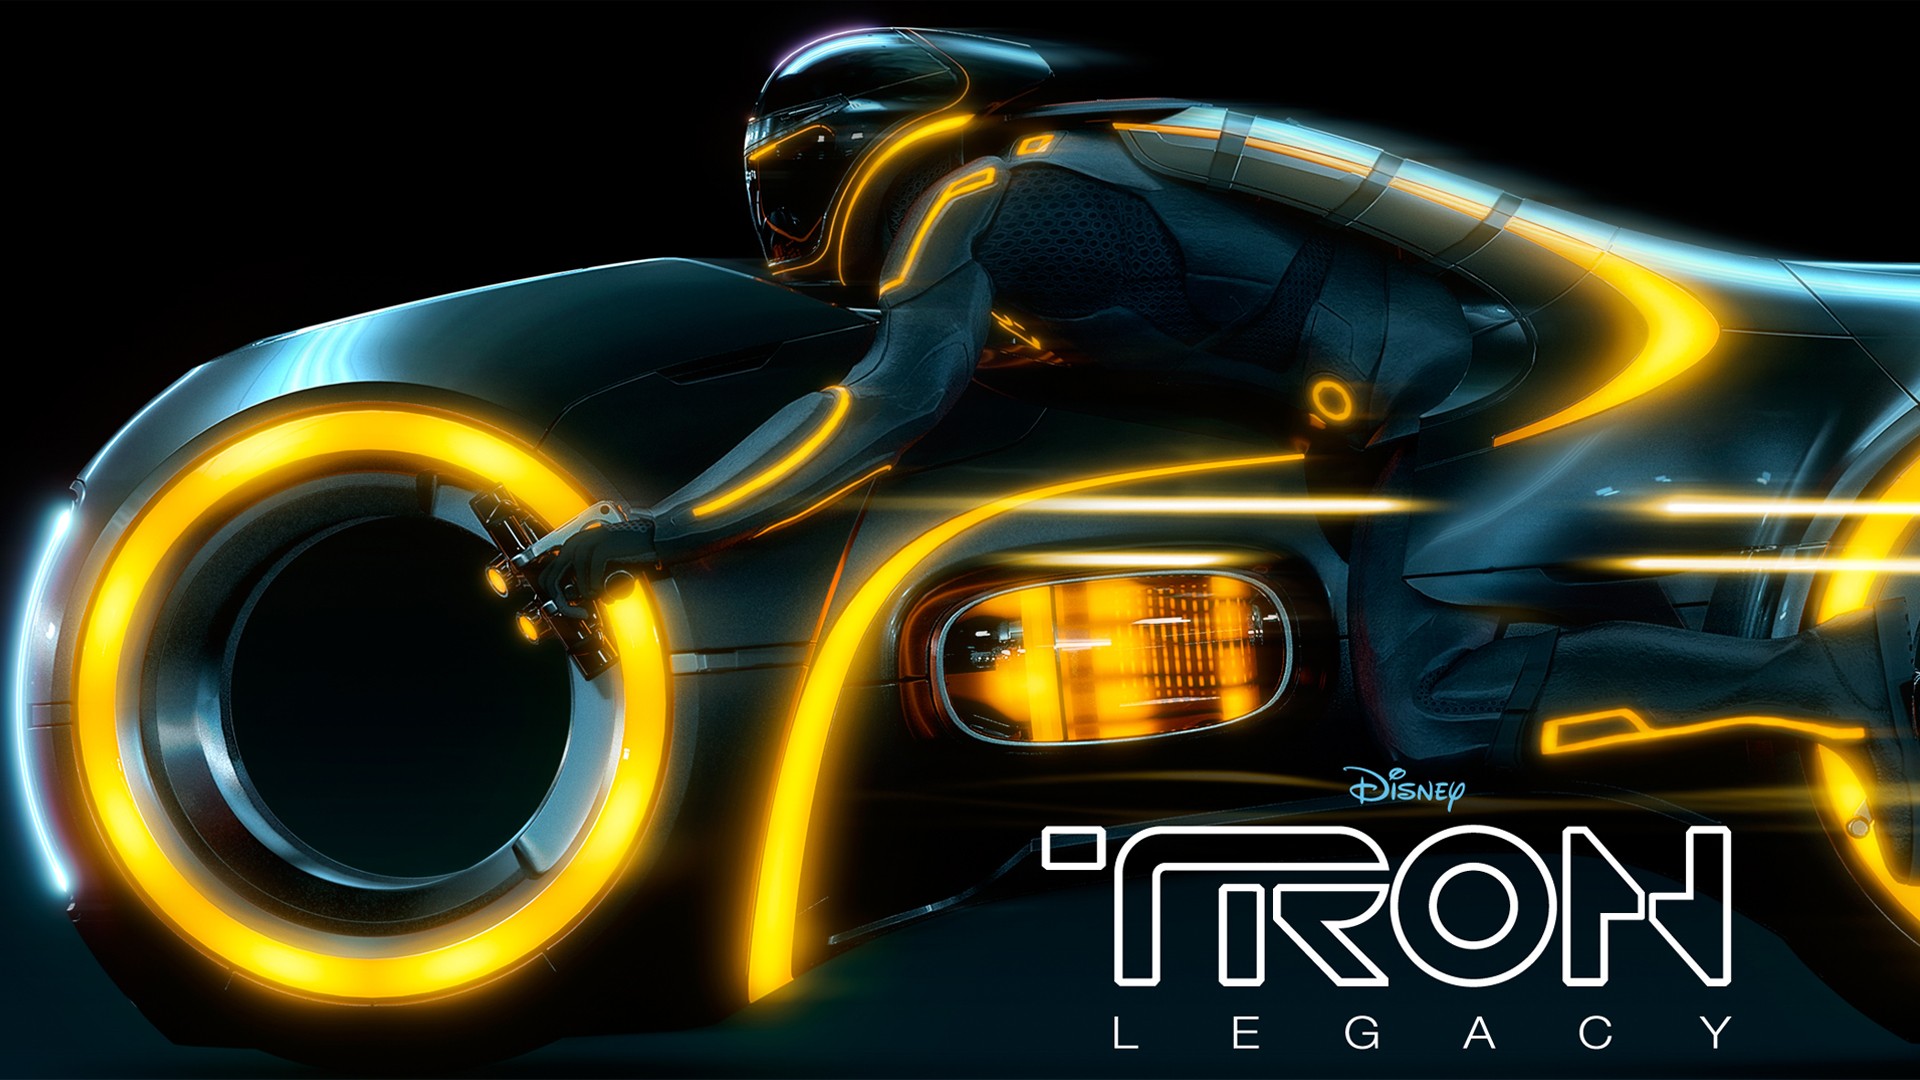 General 1920x1080 movies Tron: Legacy Light Cycle text simple background black background